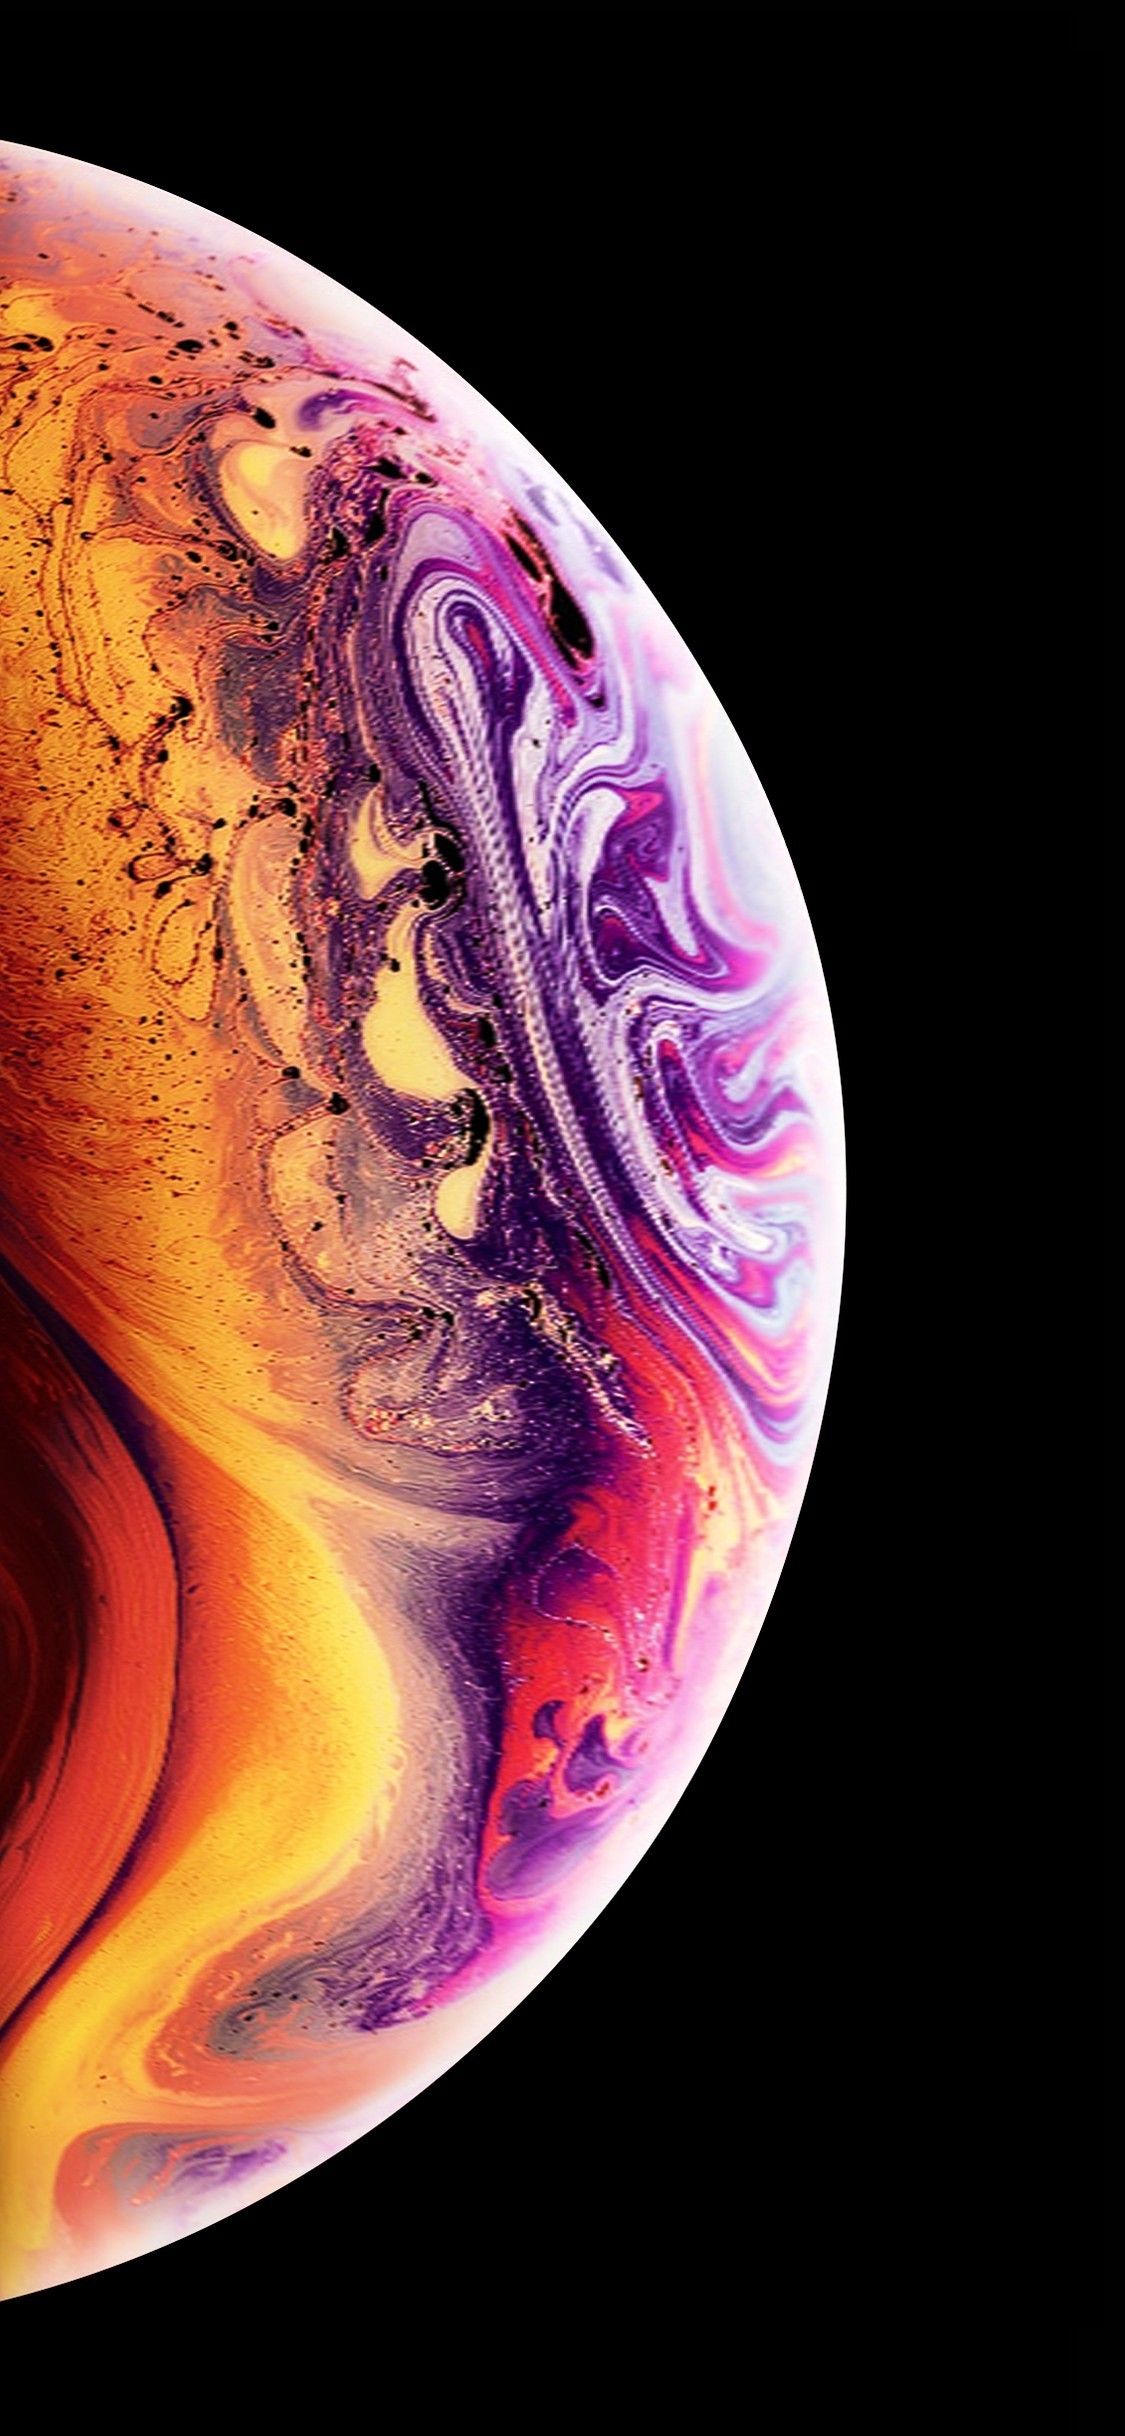 IPhone Xs Screen Lock Wallpaper With High Resolution X